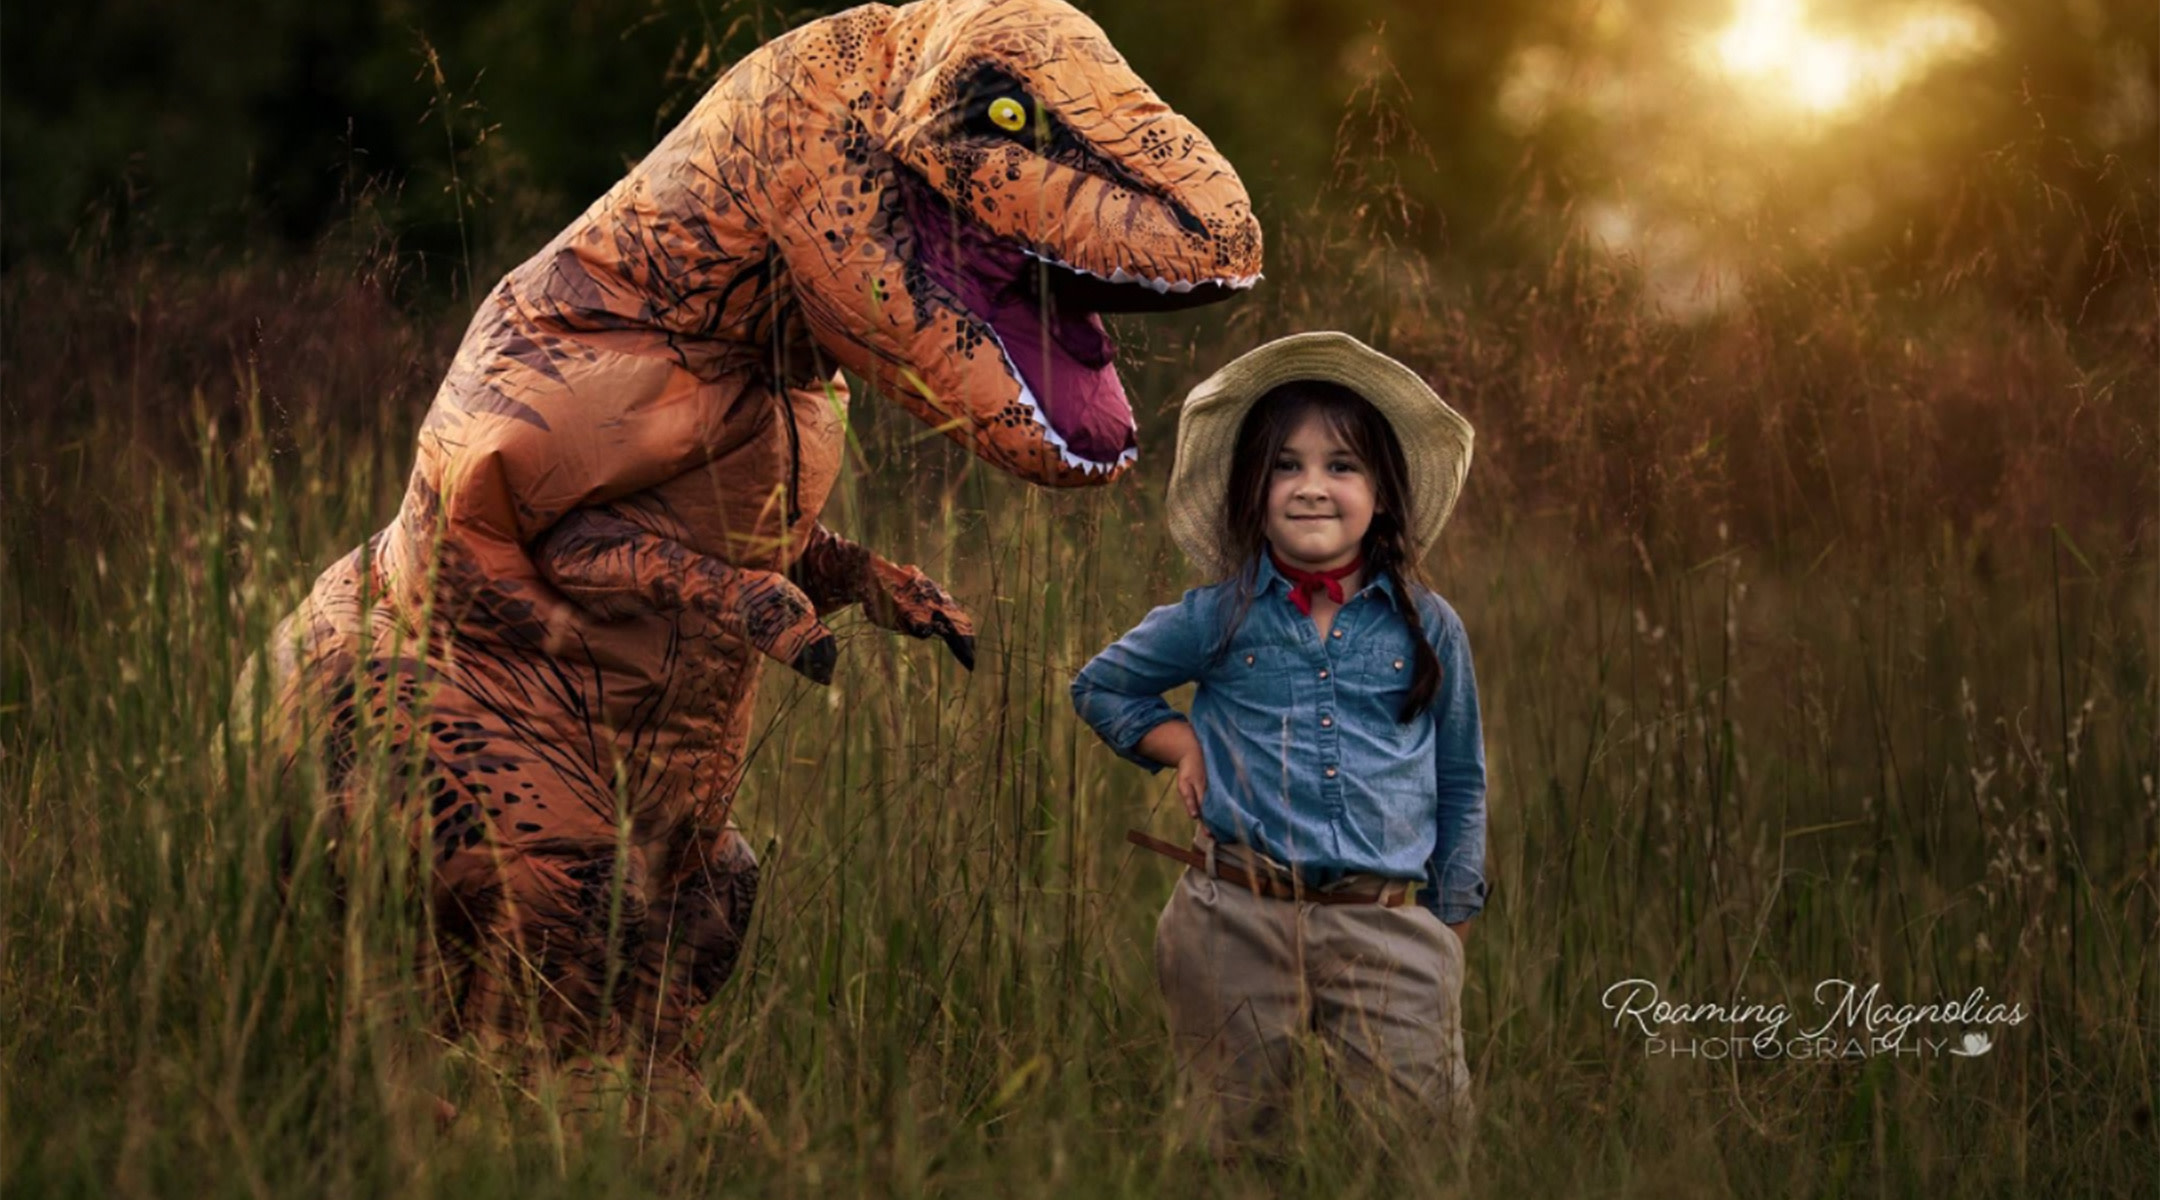 mom stages photo shoot with t rex costume for her child with autism